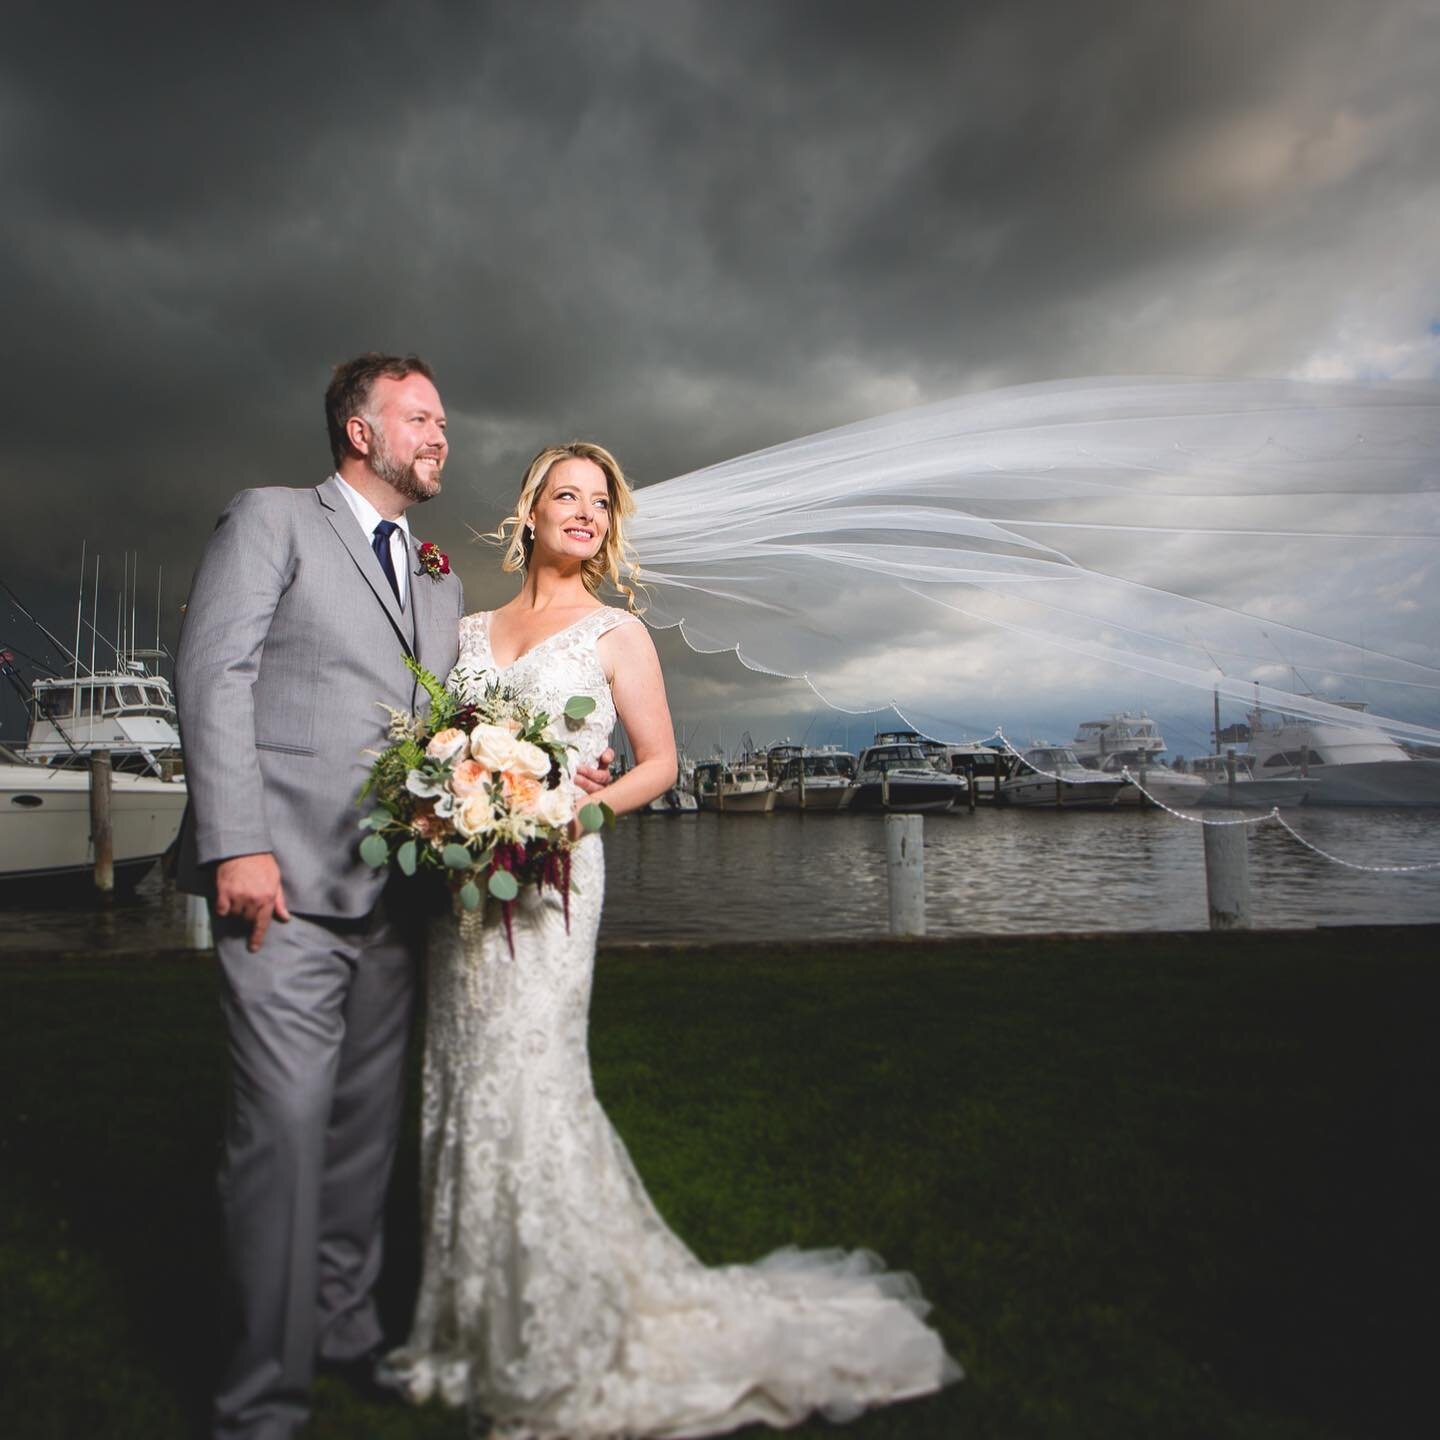 They say love is patient love is kind, well Liz and John ⁠⁠were kind enough to trust us to deliver some epic sky portraits before a crazy storm rolled in. We only had about 10 mins to set up and get the shots. They were worried about the storm but tr